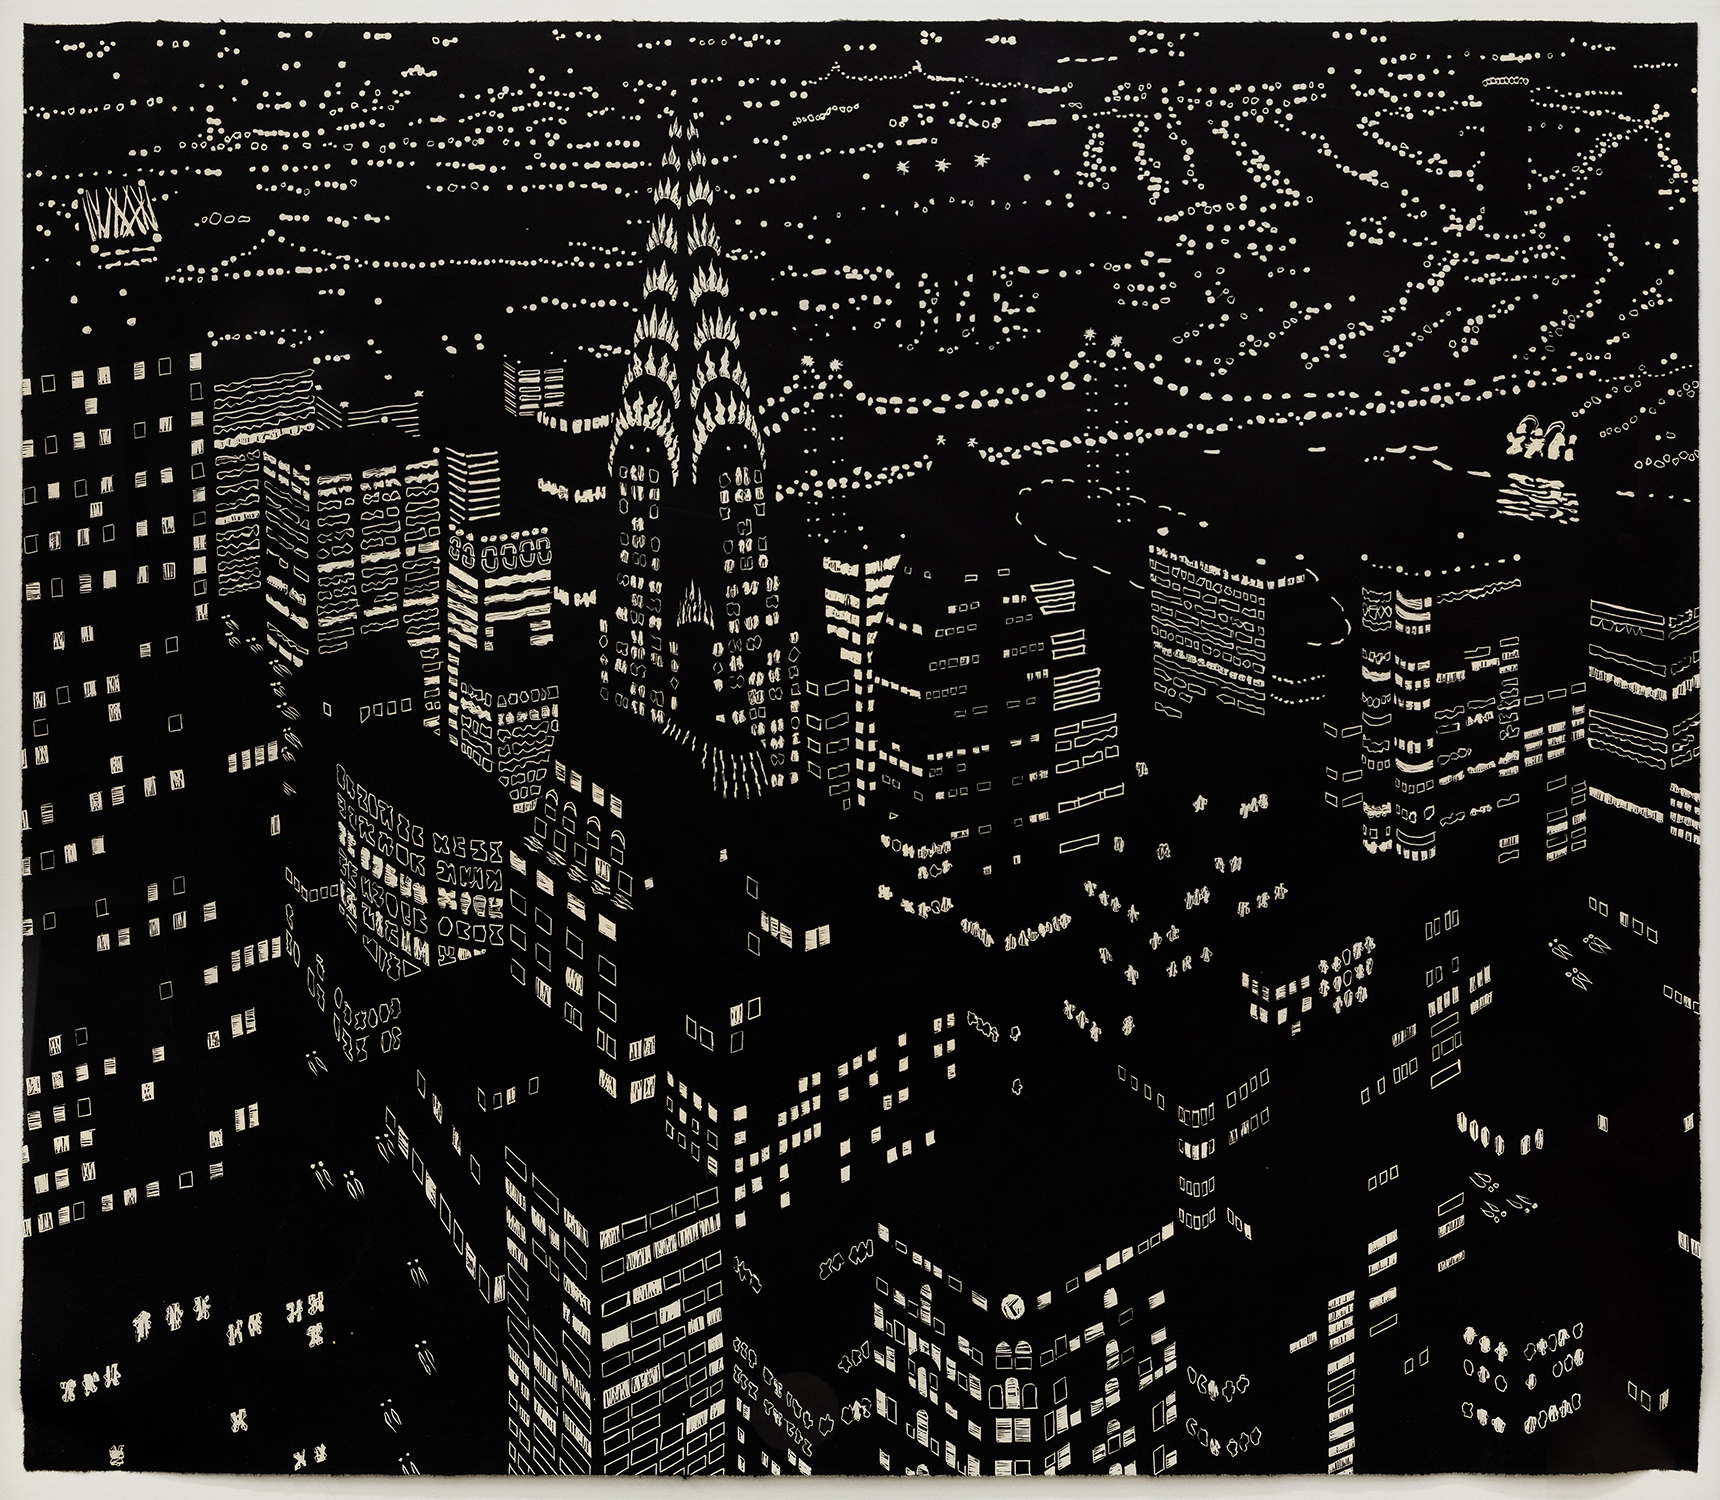 Yvonne Jacquette Midtown Composite, 1997 Woodcut 32 1/2 x 38 inches Edition 36 of 50